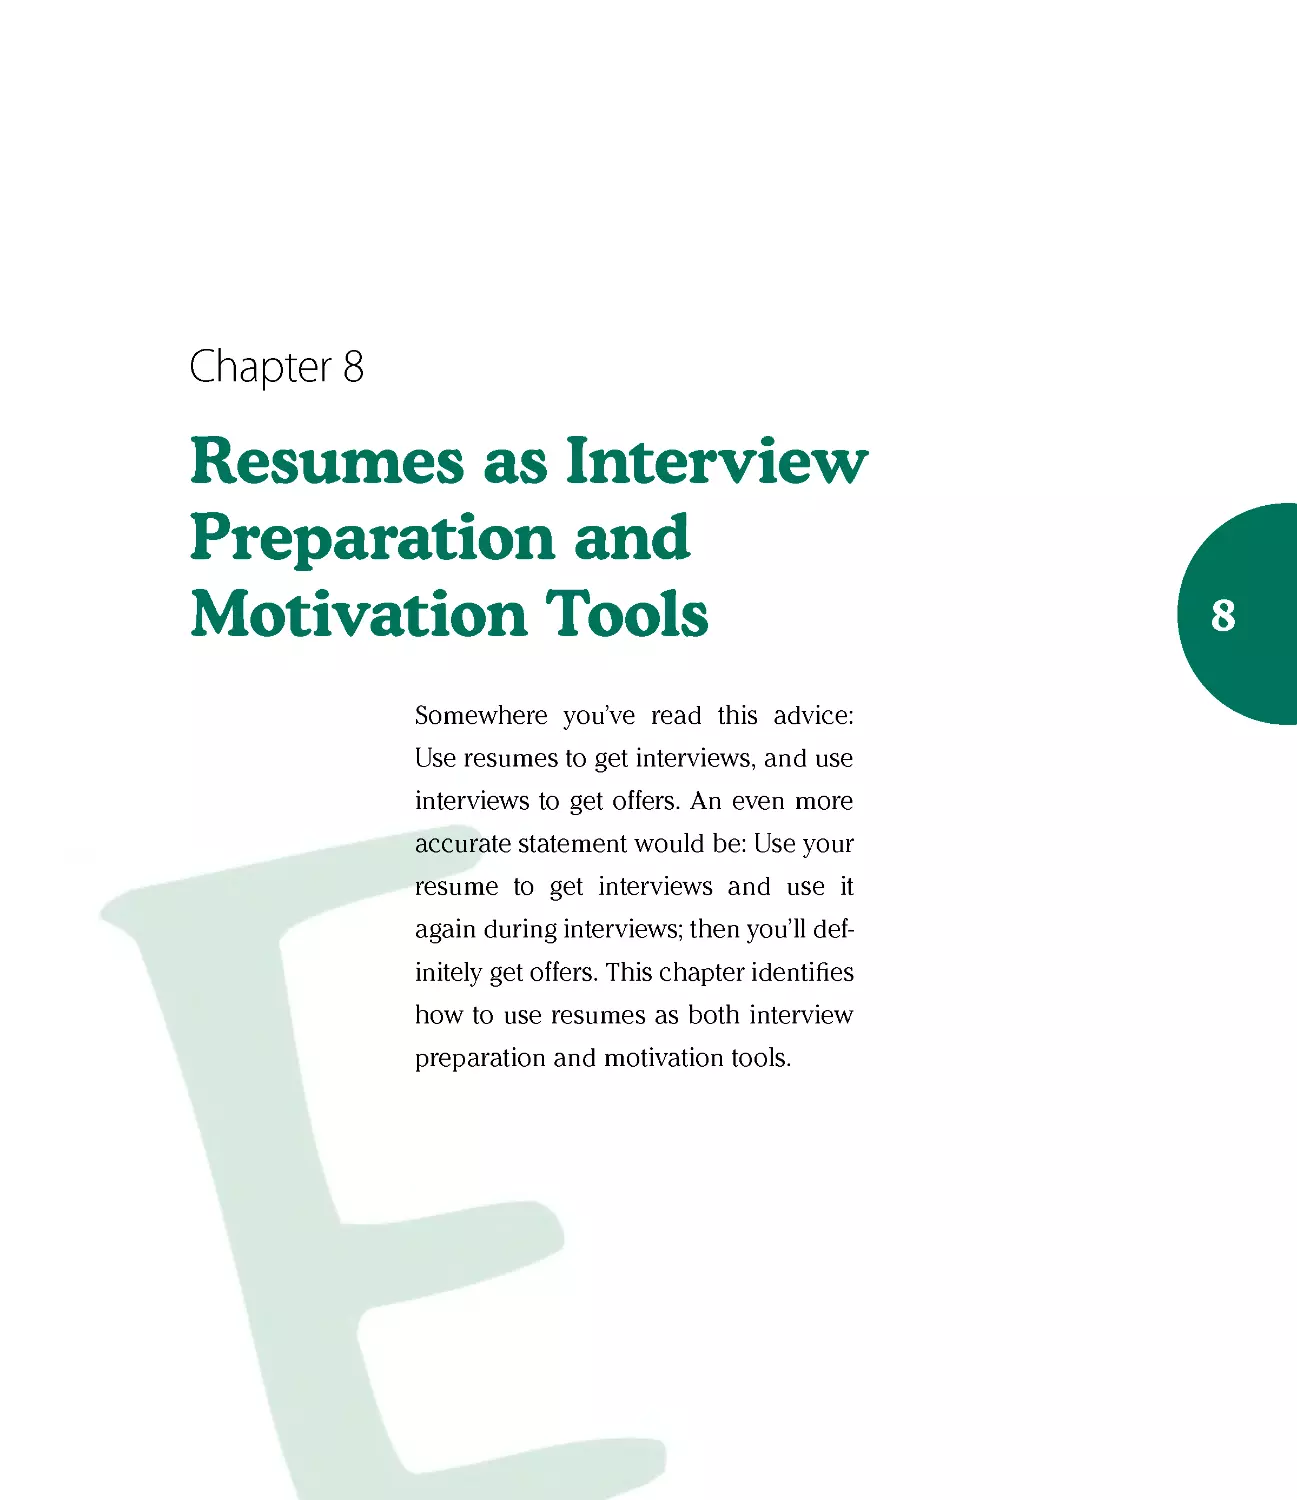 Chapter 8: Resumes as Interview Preparation and Motivation Tools